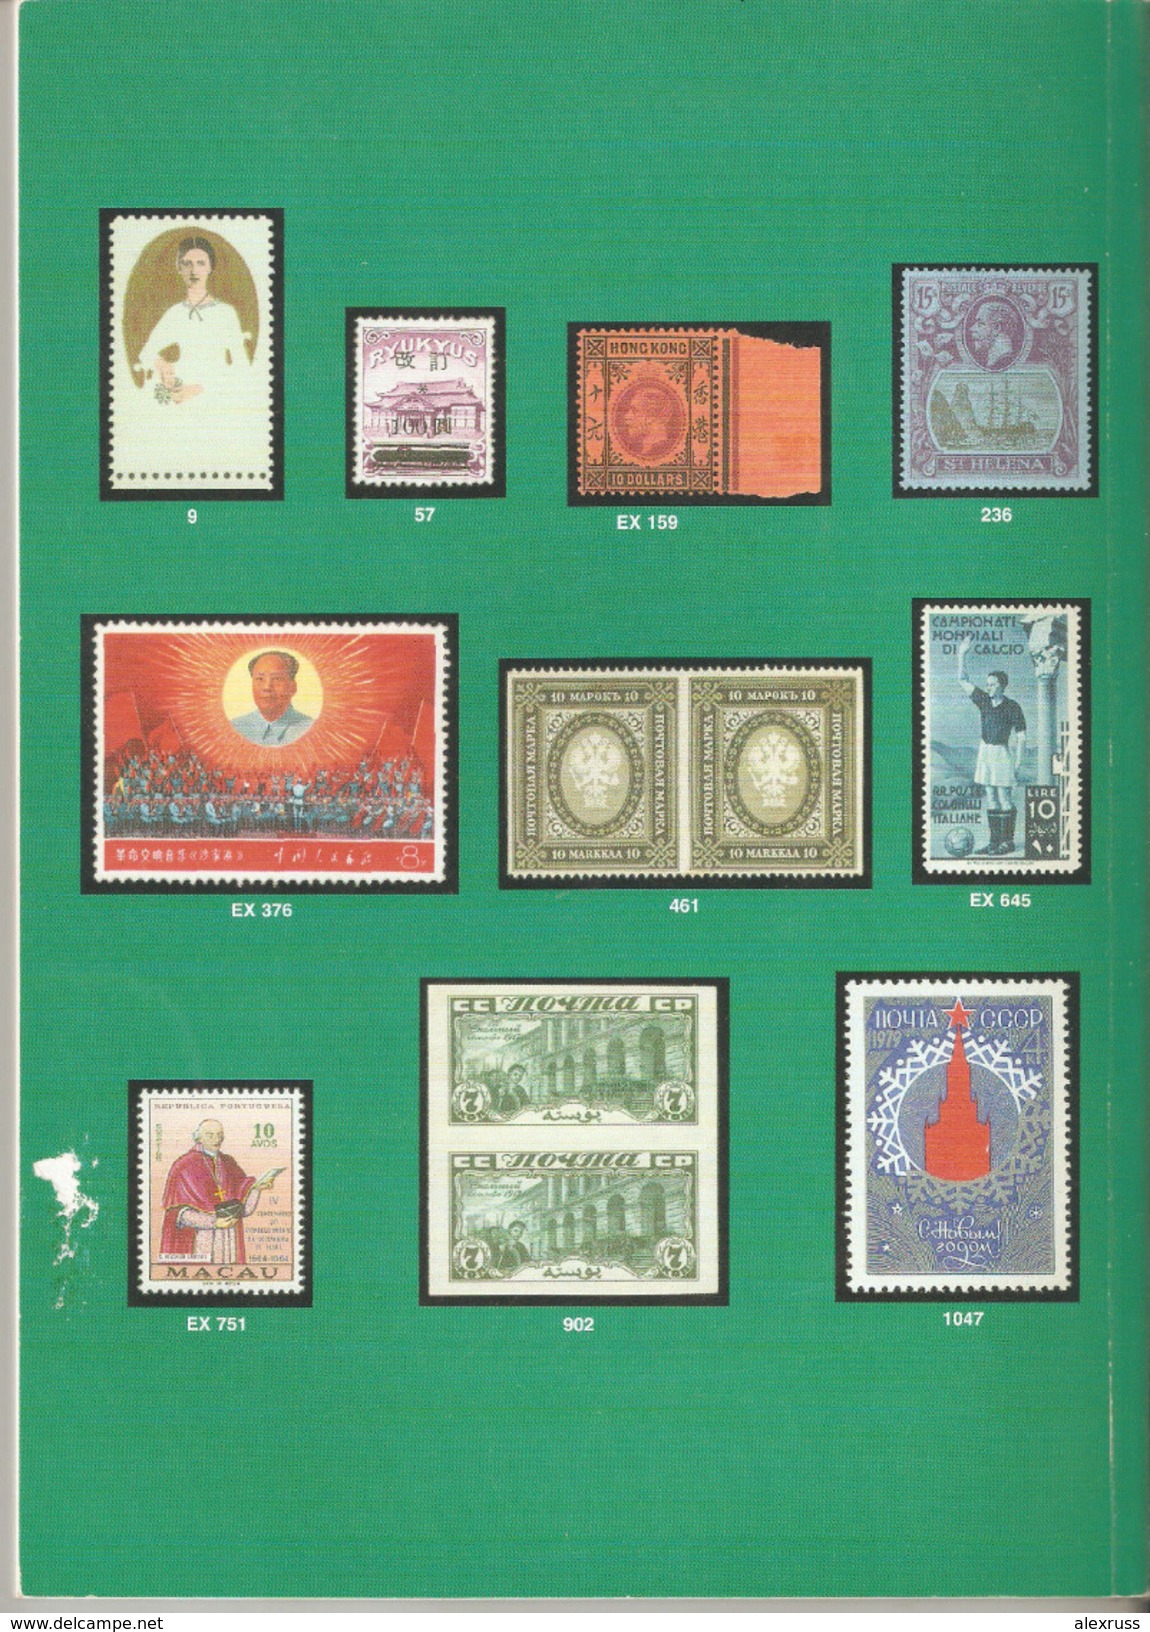 Raritan Stamps Auction 40,Aug 2009 Catalog Of Rare Russia Stamps,Errors & Worldwide Rarities - Cataloghi Di Case D'aste